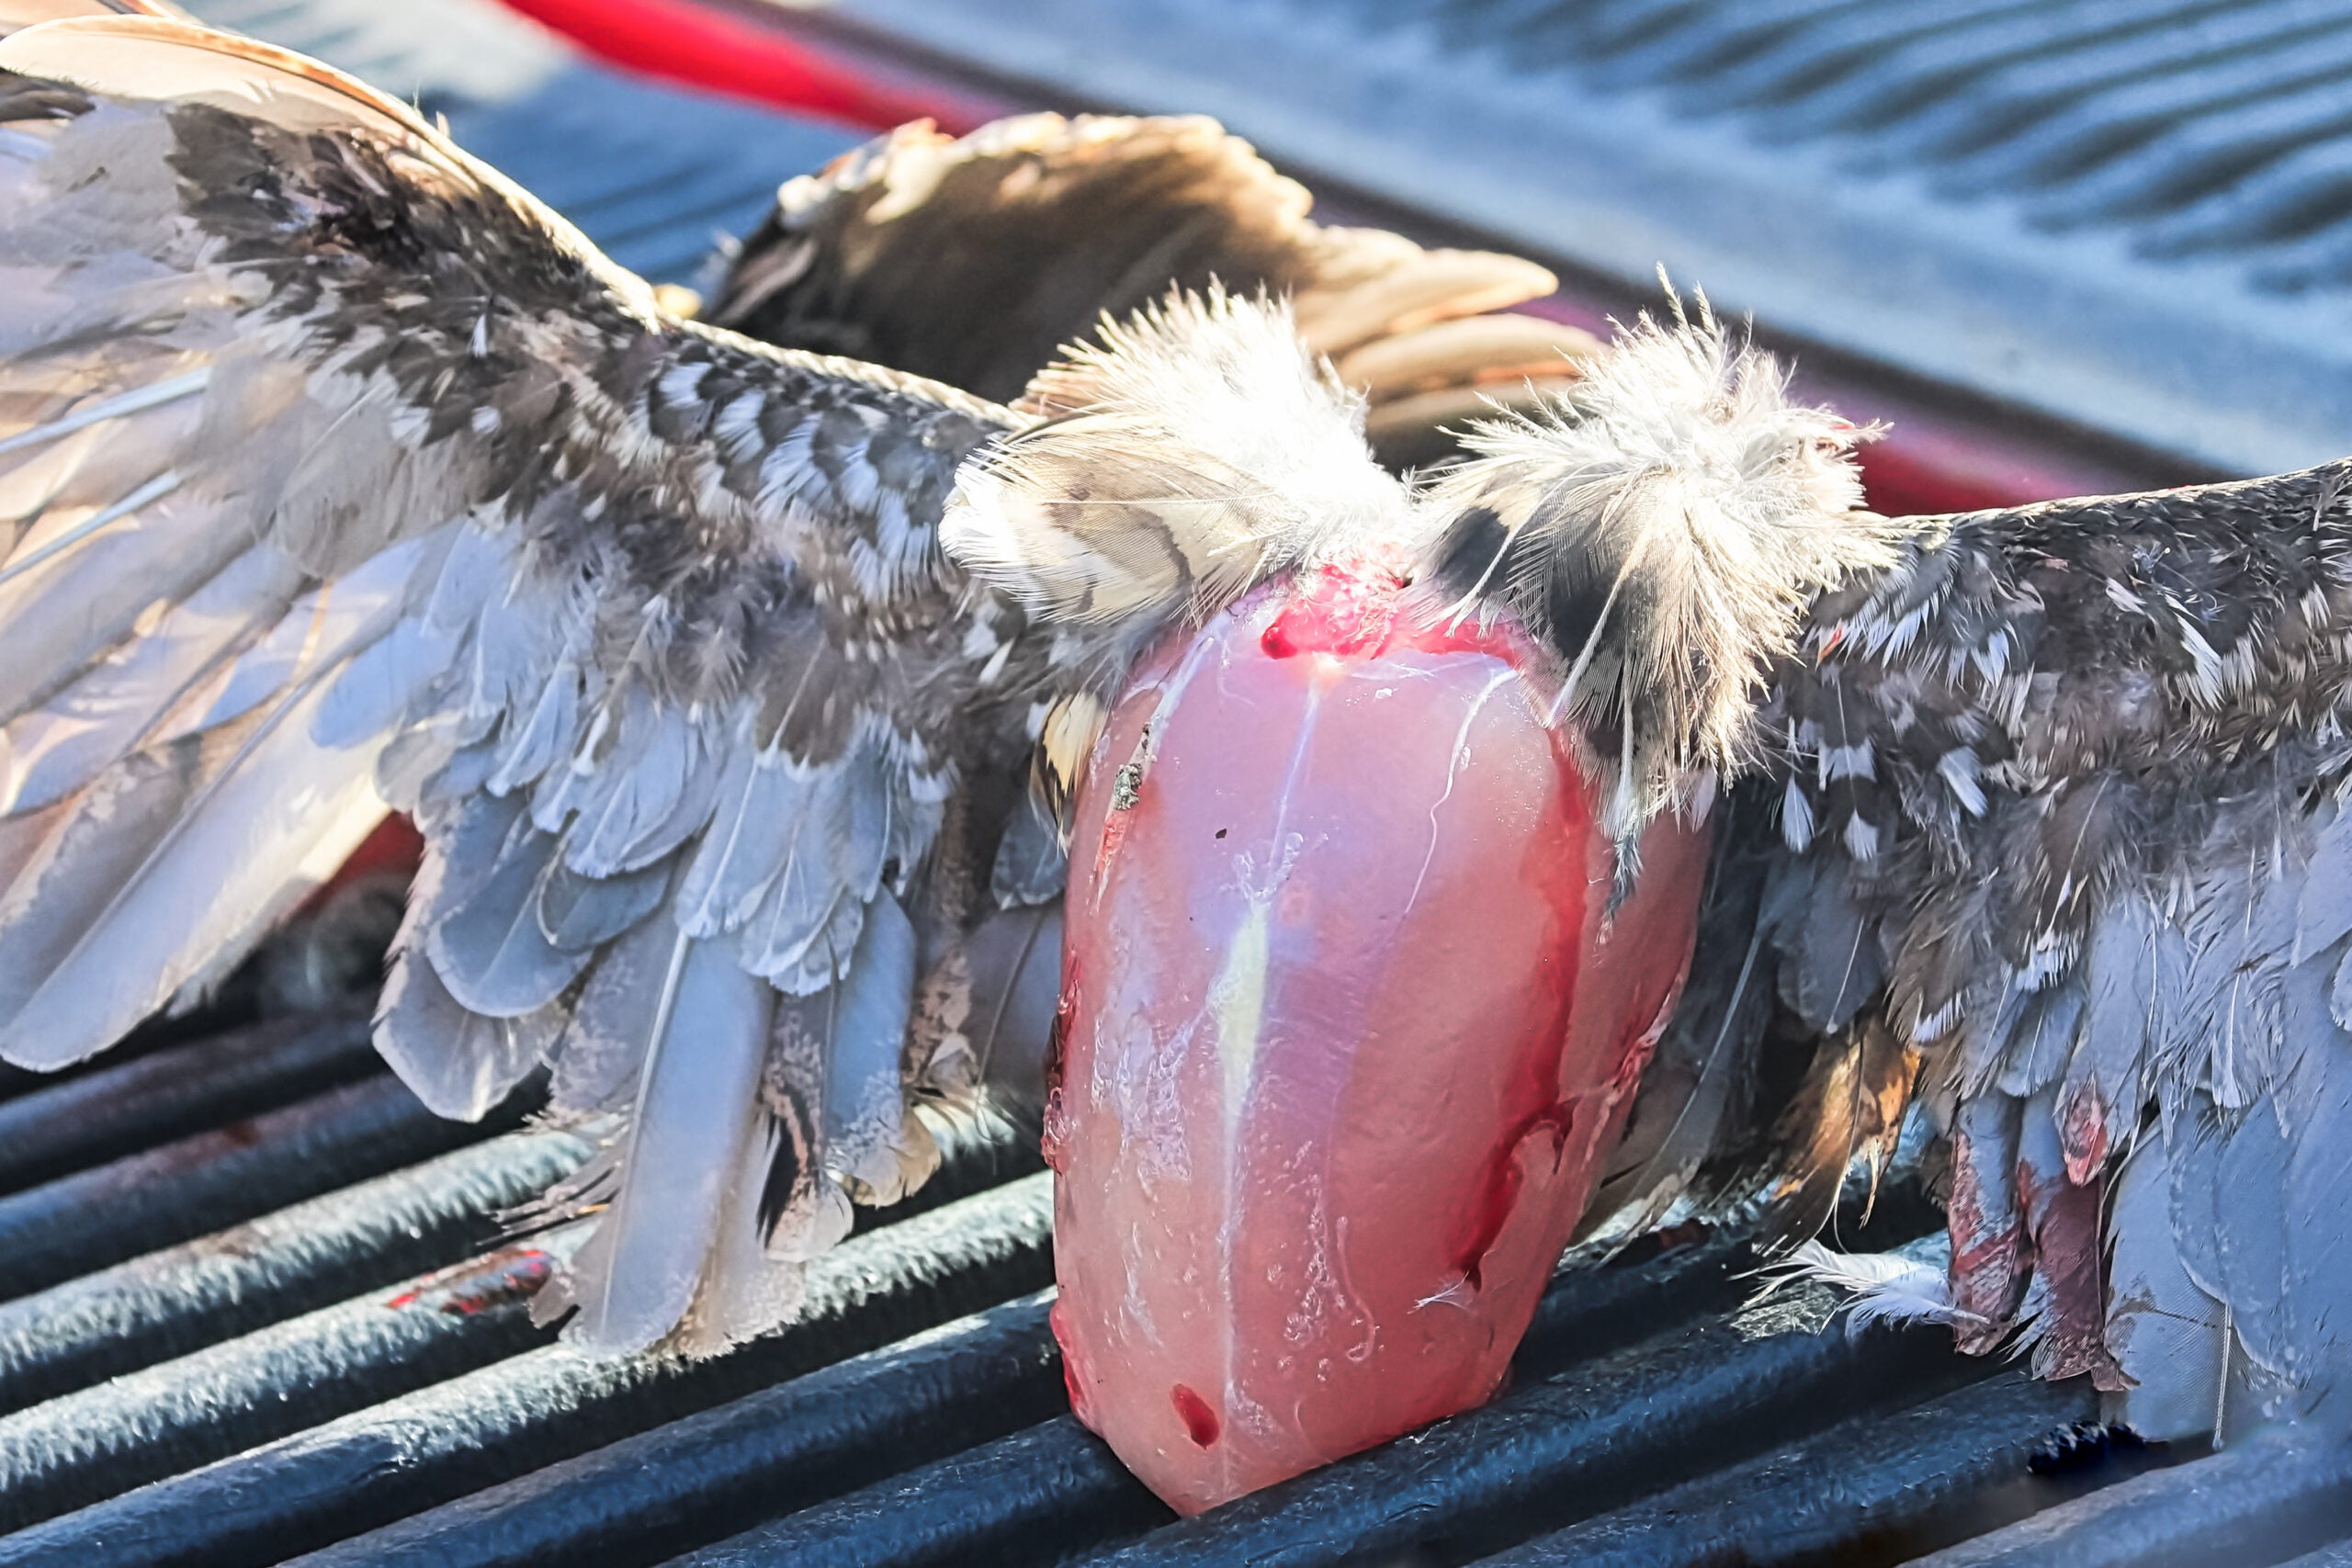 The breast of a cleaned bird before removing the wings.